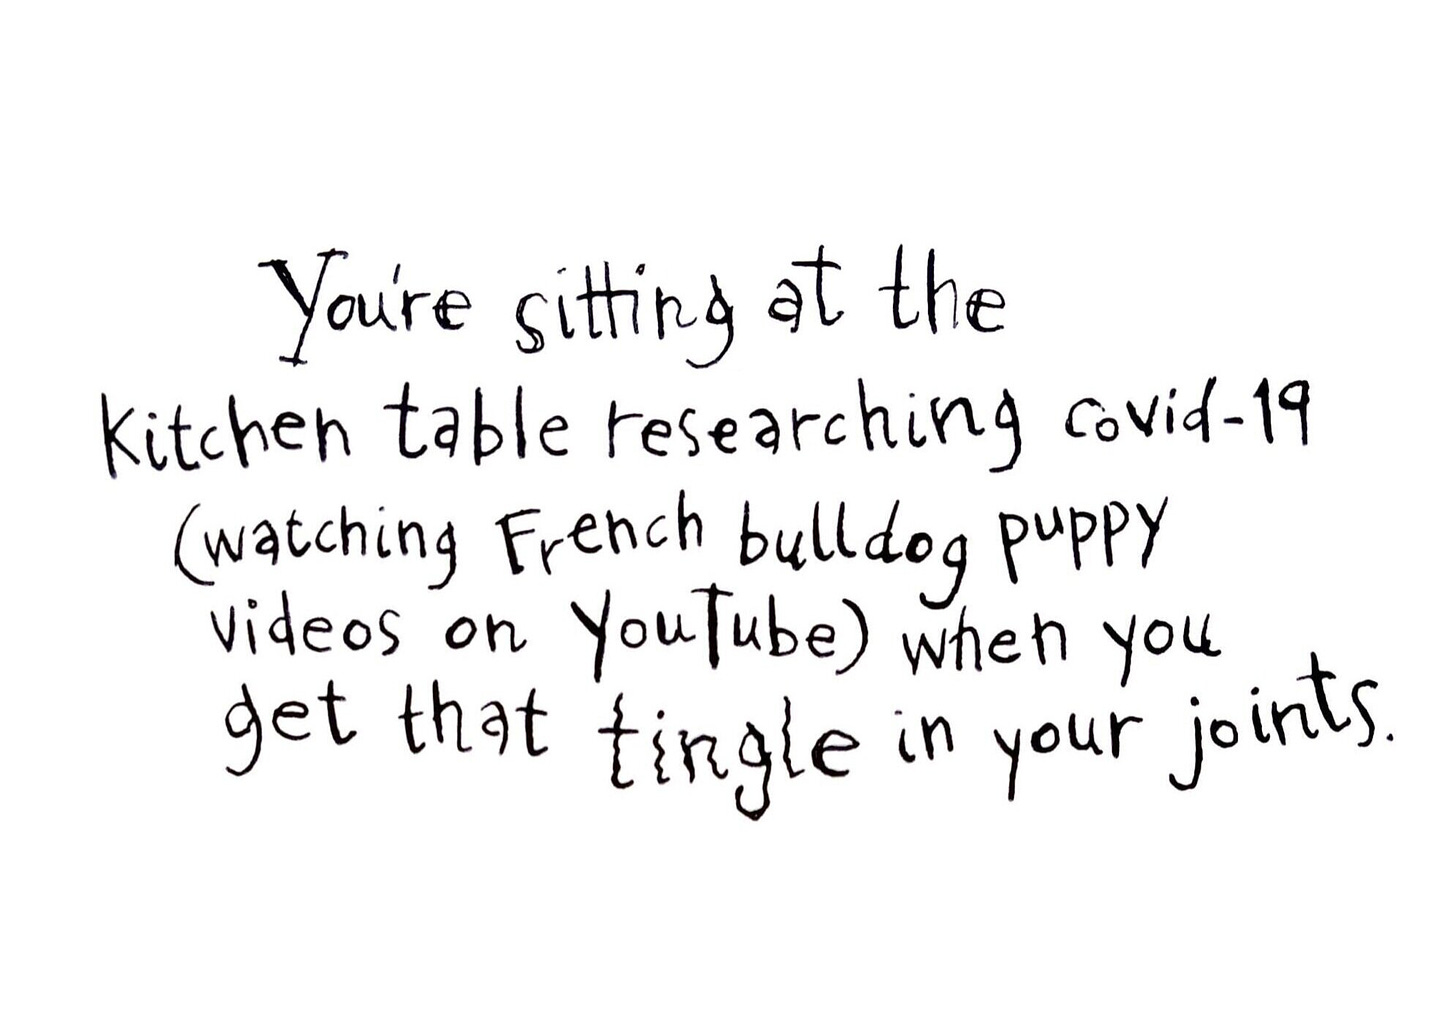 You're sitting at the kitchen table researching covid-19 (watching French Bulldog Puppy videos on Youtube) when you get that tingle in your joints